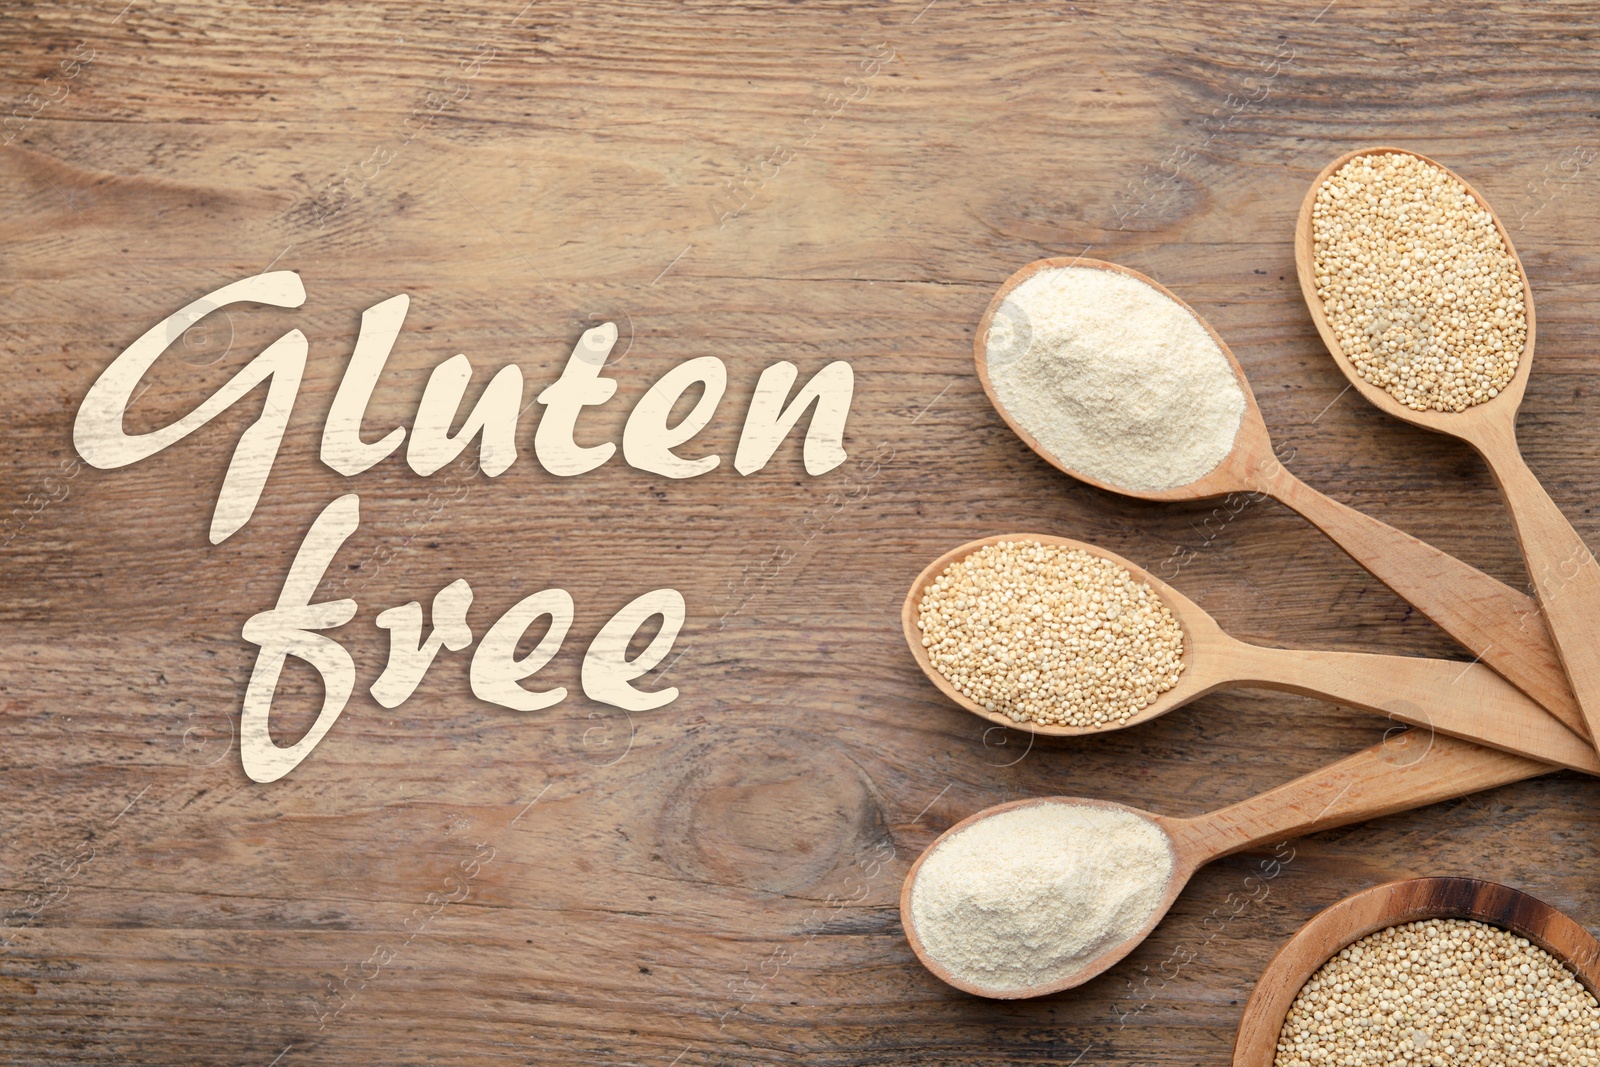 Image of Gluten free products. Spoons with different types of flour and text on wooden table, top view